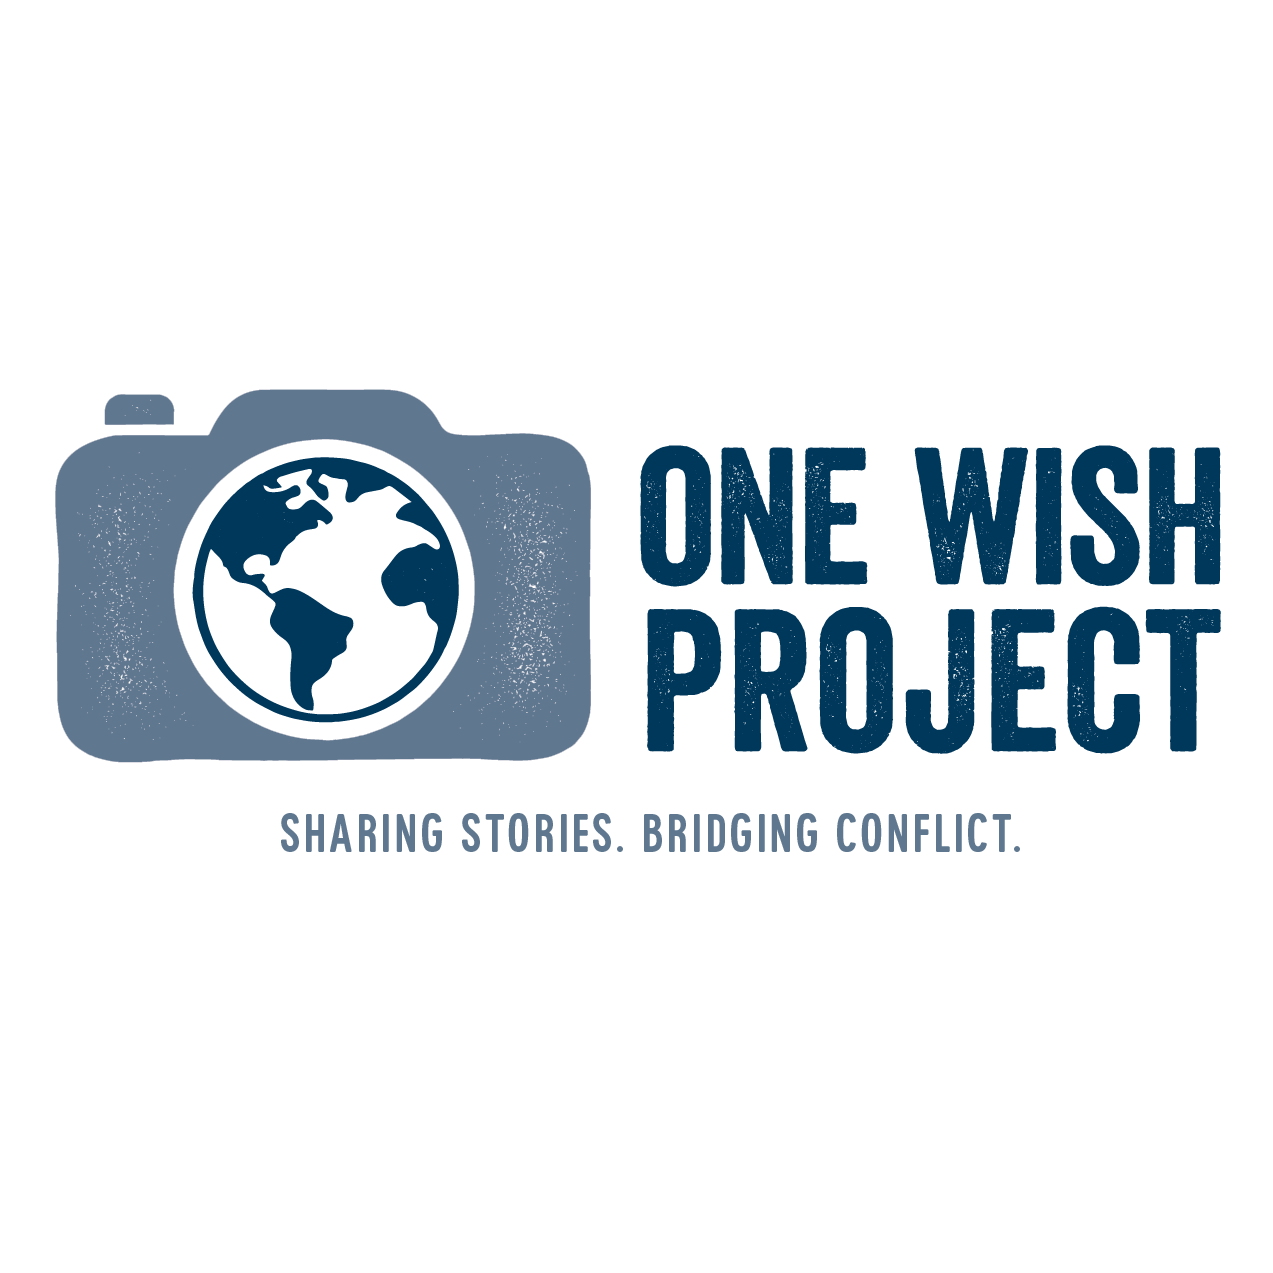 One Wish Project aims to create a more unified world by producing films, educational content and interactive events that highlight our shared humanity.